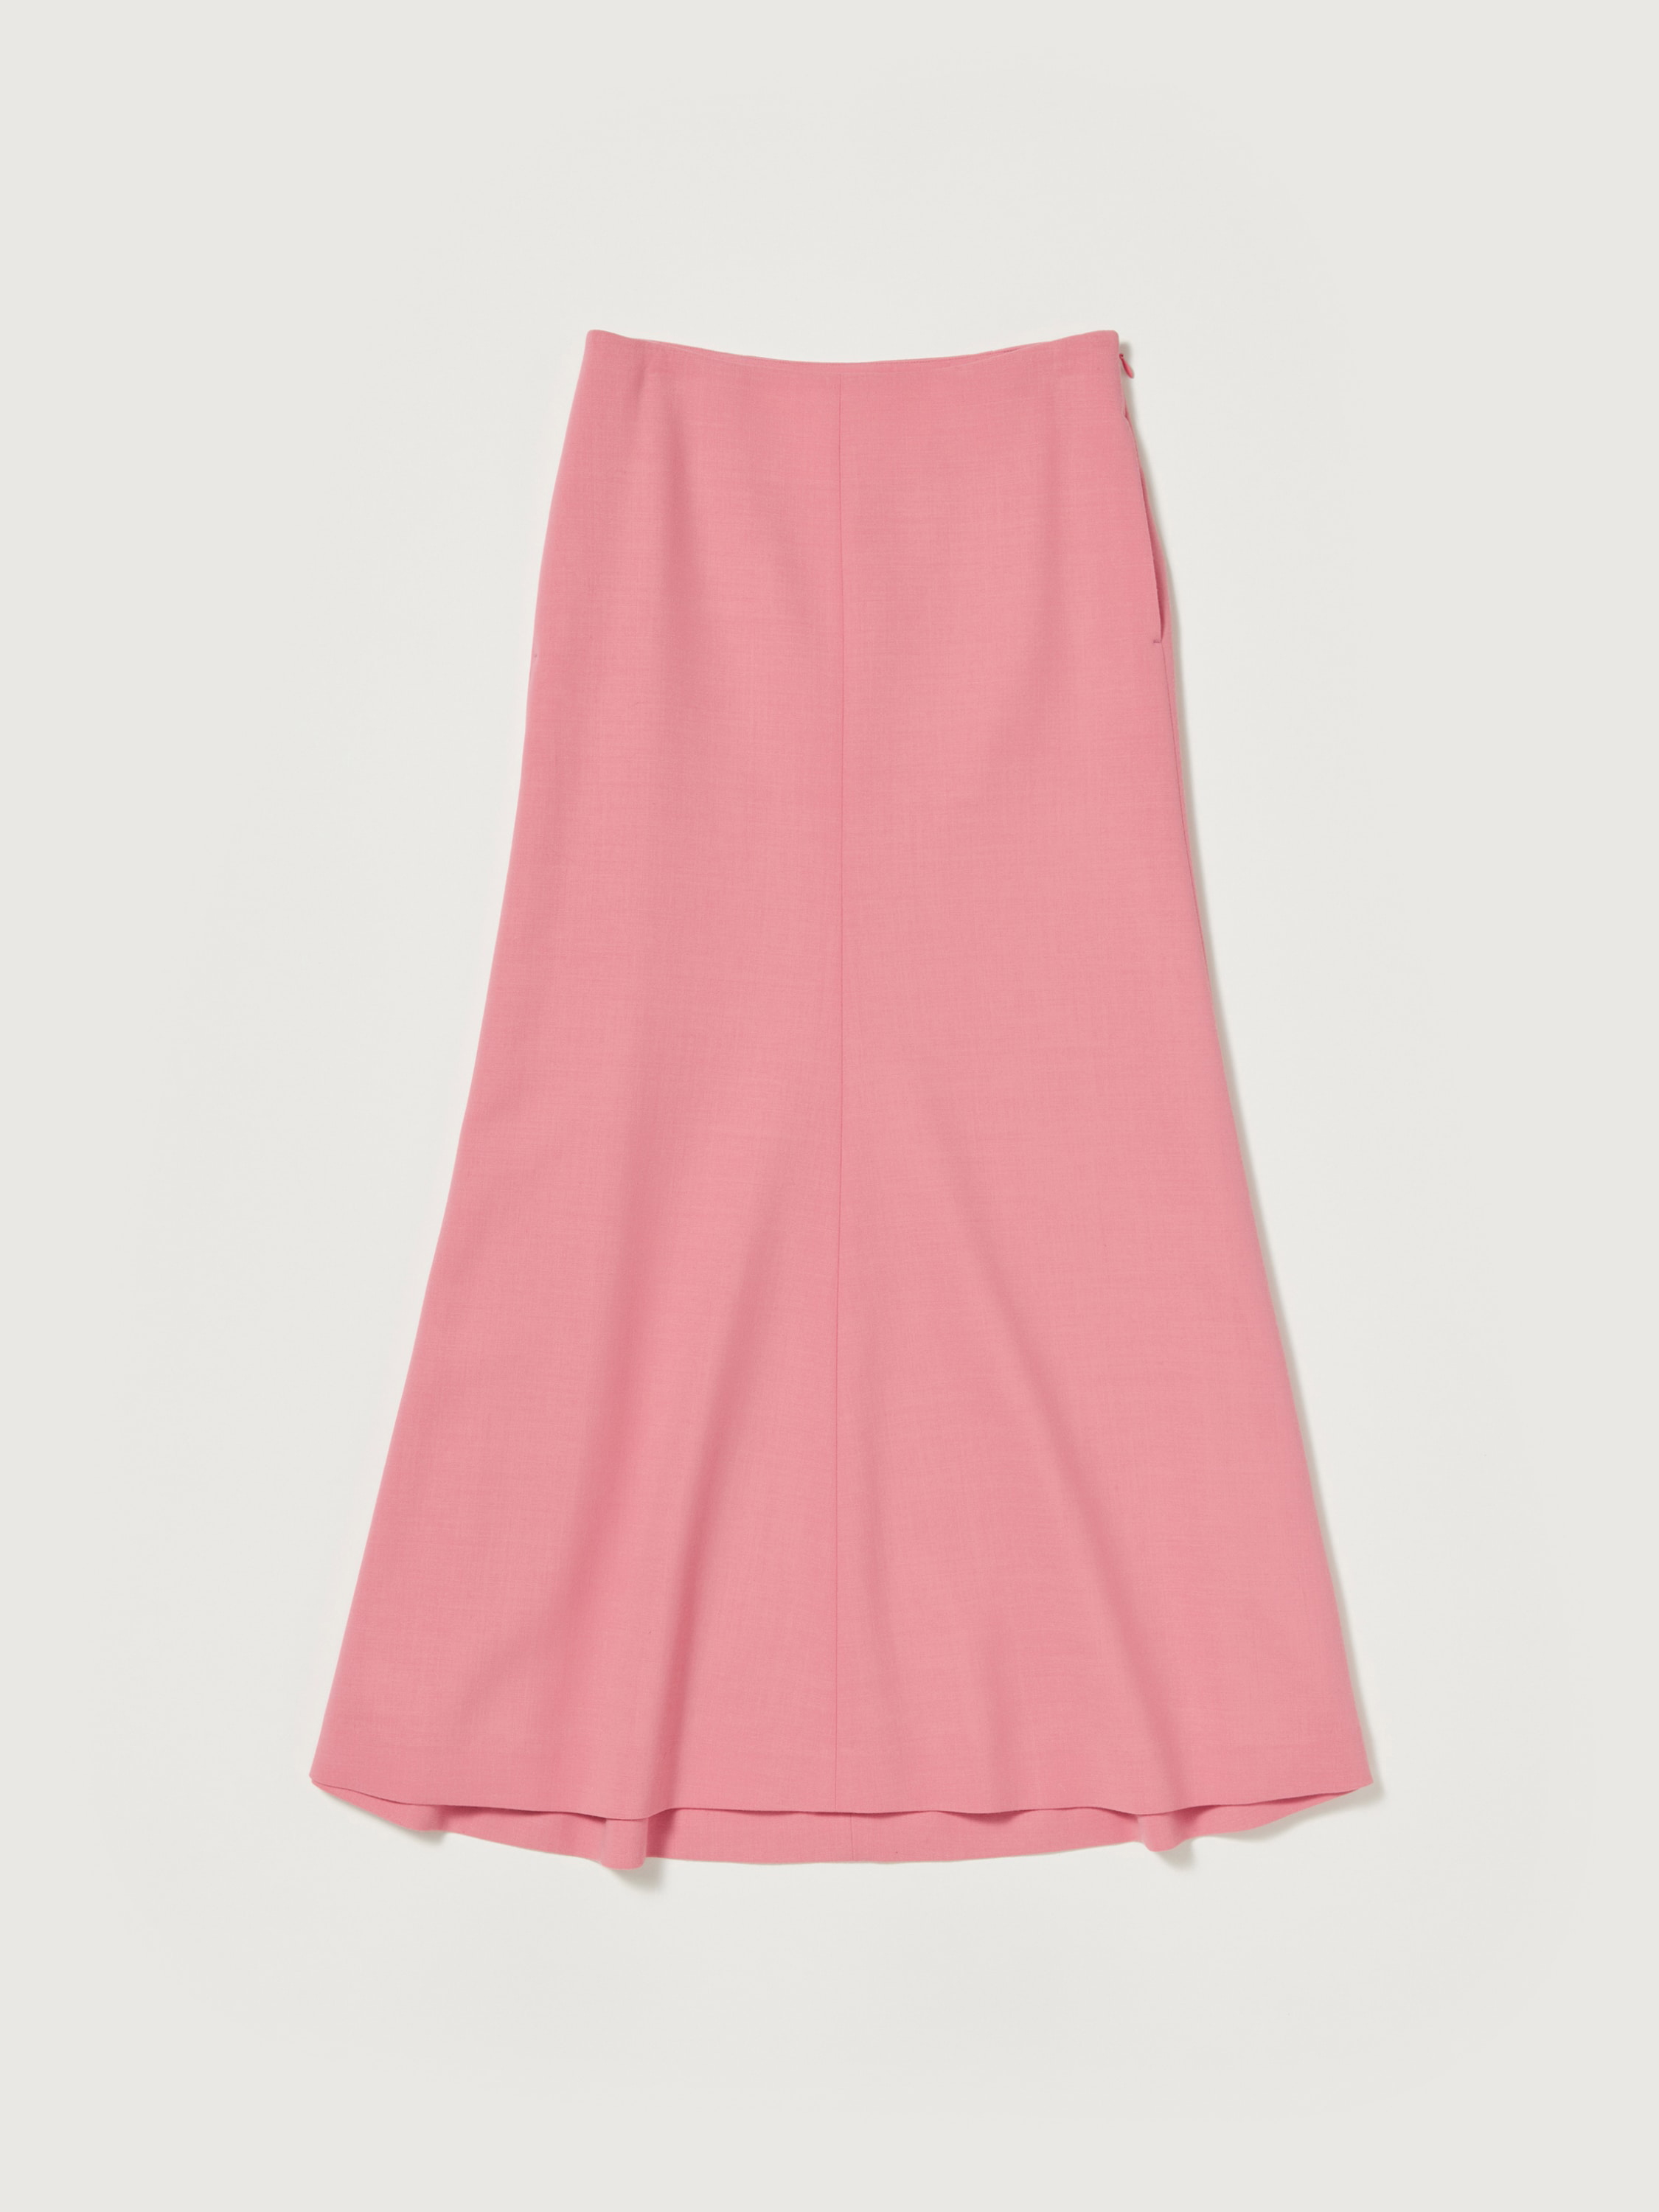 TENSE WOOL DOUBLE CLOTH FLARE SKIRT 詳細画像 PINK 1